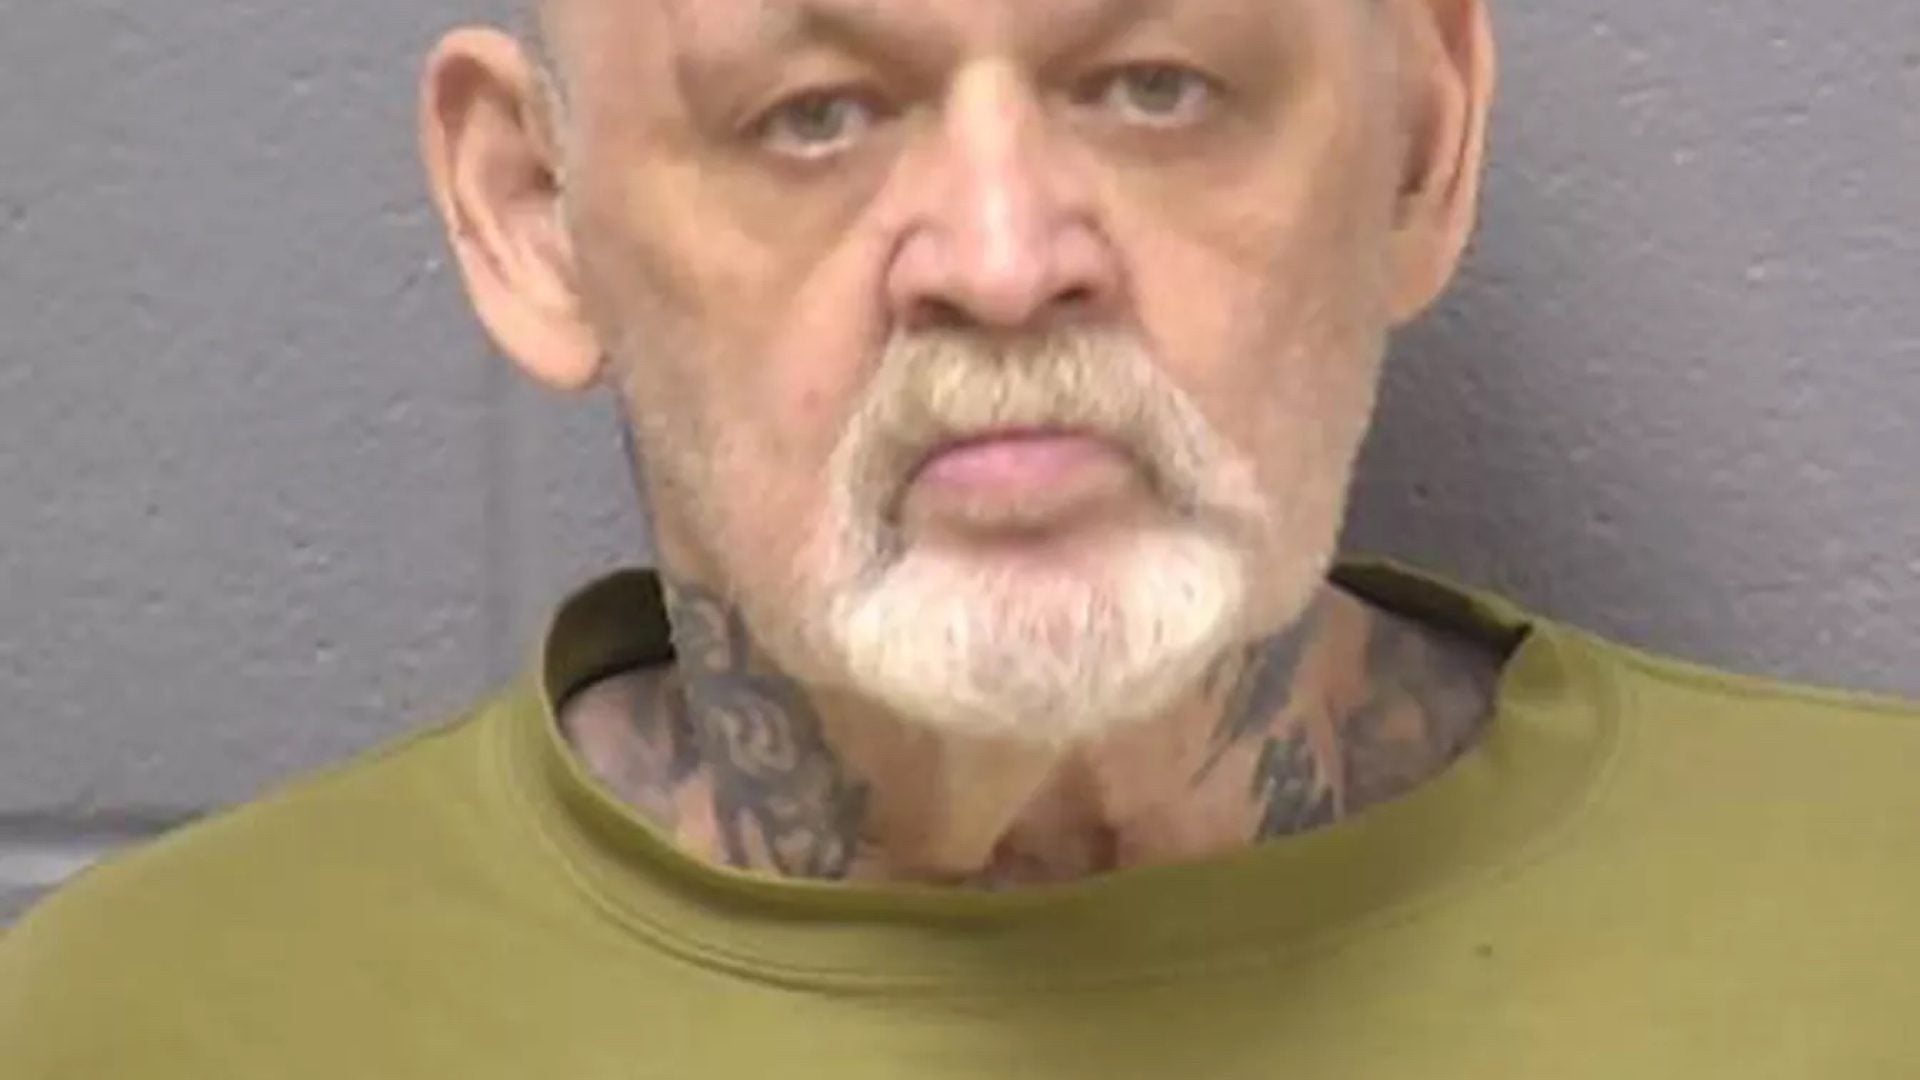 Illinois Man Allegedly Harassed White Mom With Two Black Sons For Years. He's Now Charged With A Hate Crime, Attempted Murder For Shooting Her